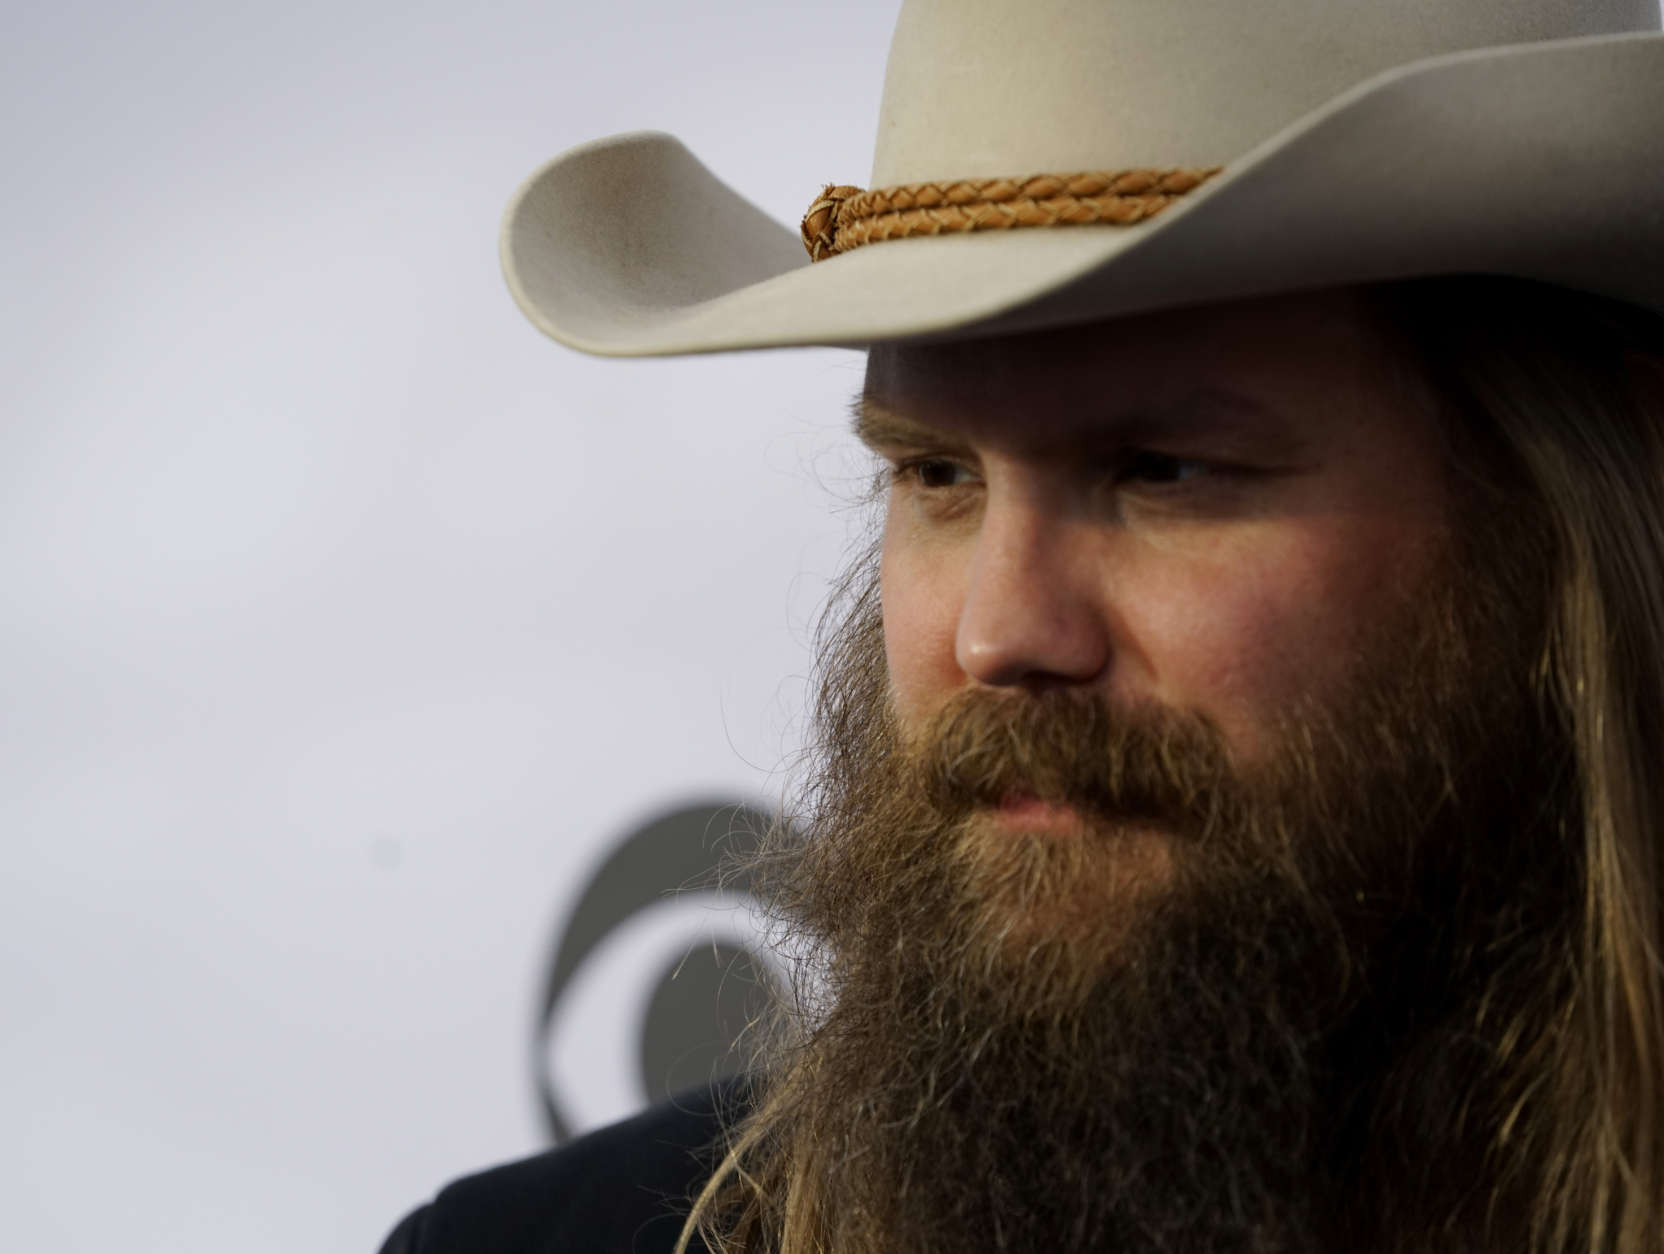 Chris Stapleton arrives at the 11th annual ACM Honors at Ryman Auditorium on Wednesday, Aug. 23, 2017, in Nashville, Tenn. (Photo by Sanford Myers/Invision/AP)